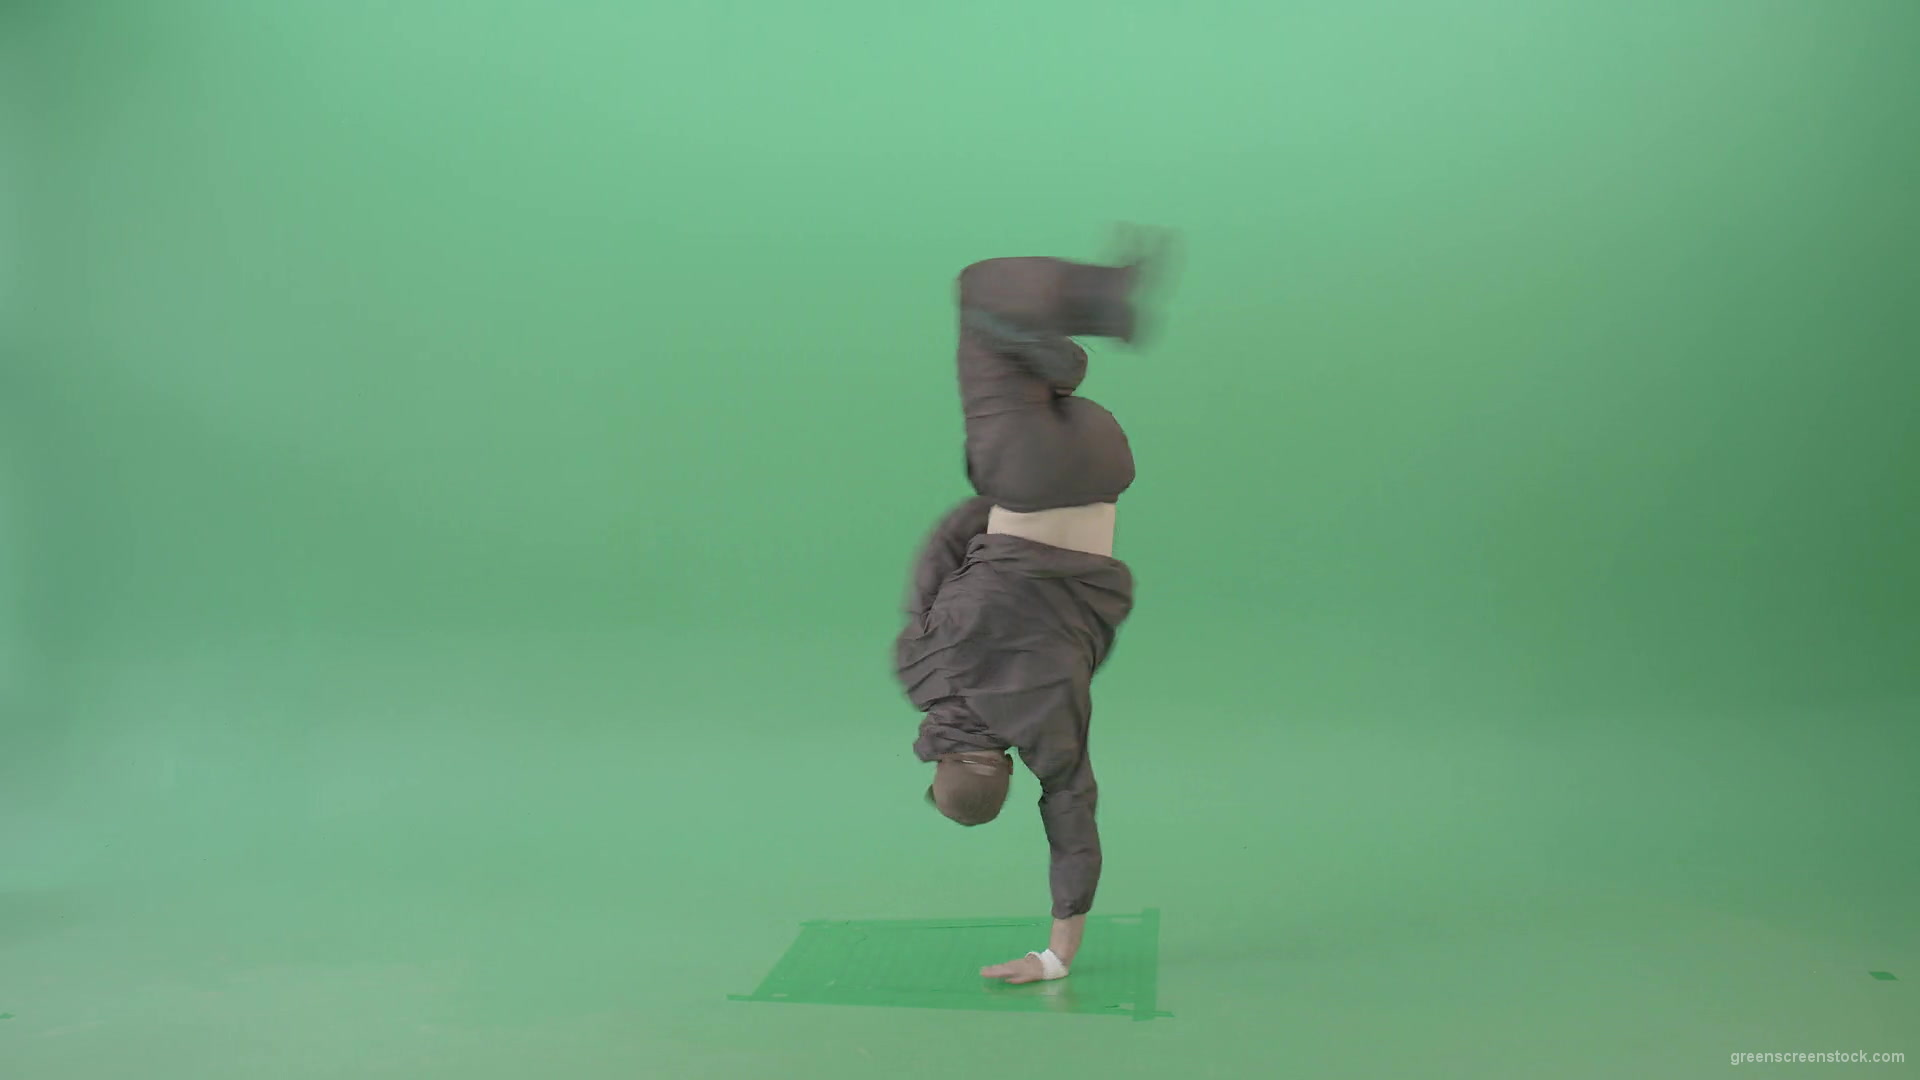 Breakadance-Man-making-dynamic-power-move-element-spinning-on-hand-over-green-screen-4K-Video-Footage-1920_005 Green Screen Stock